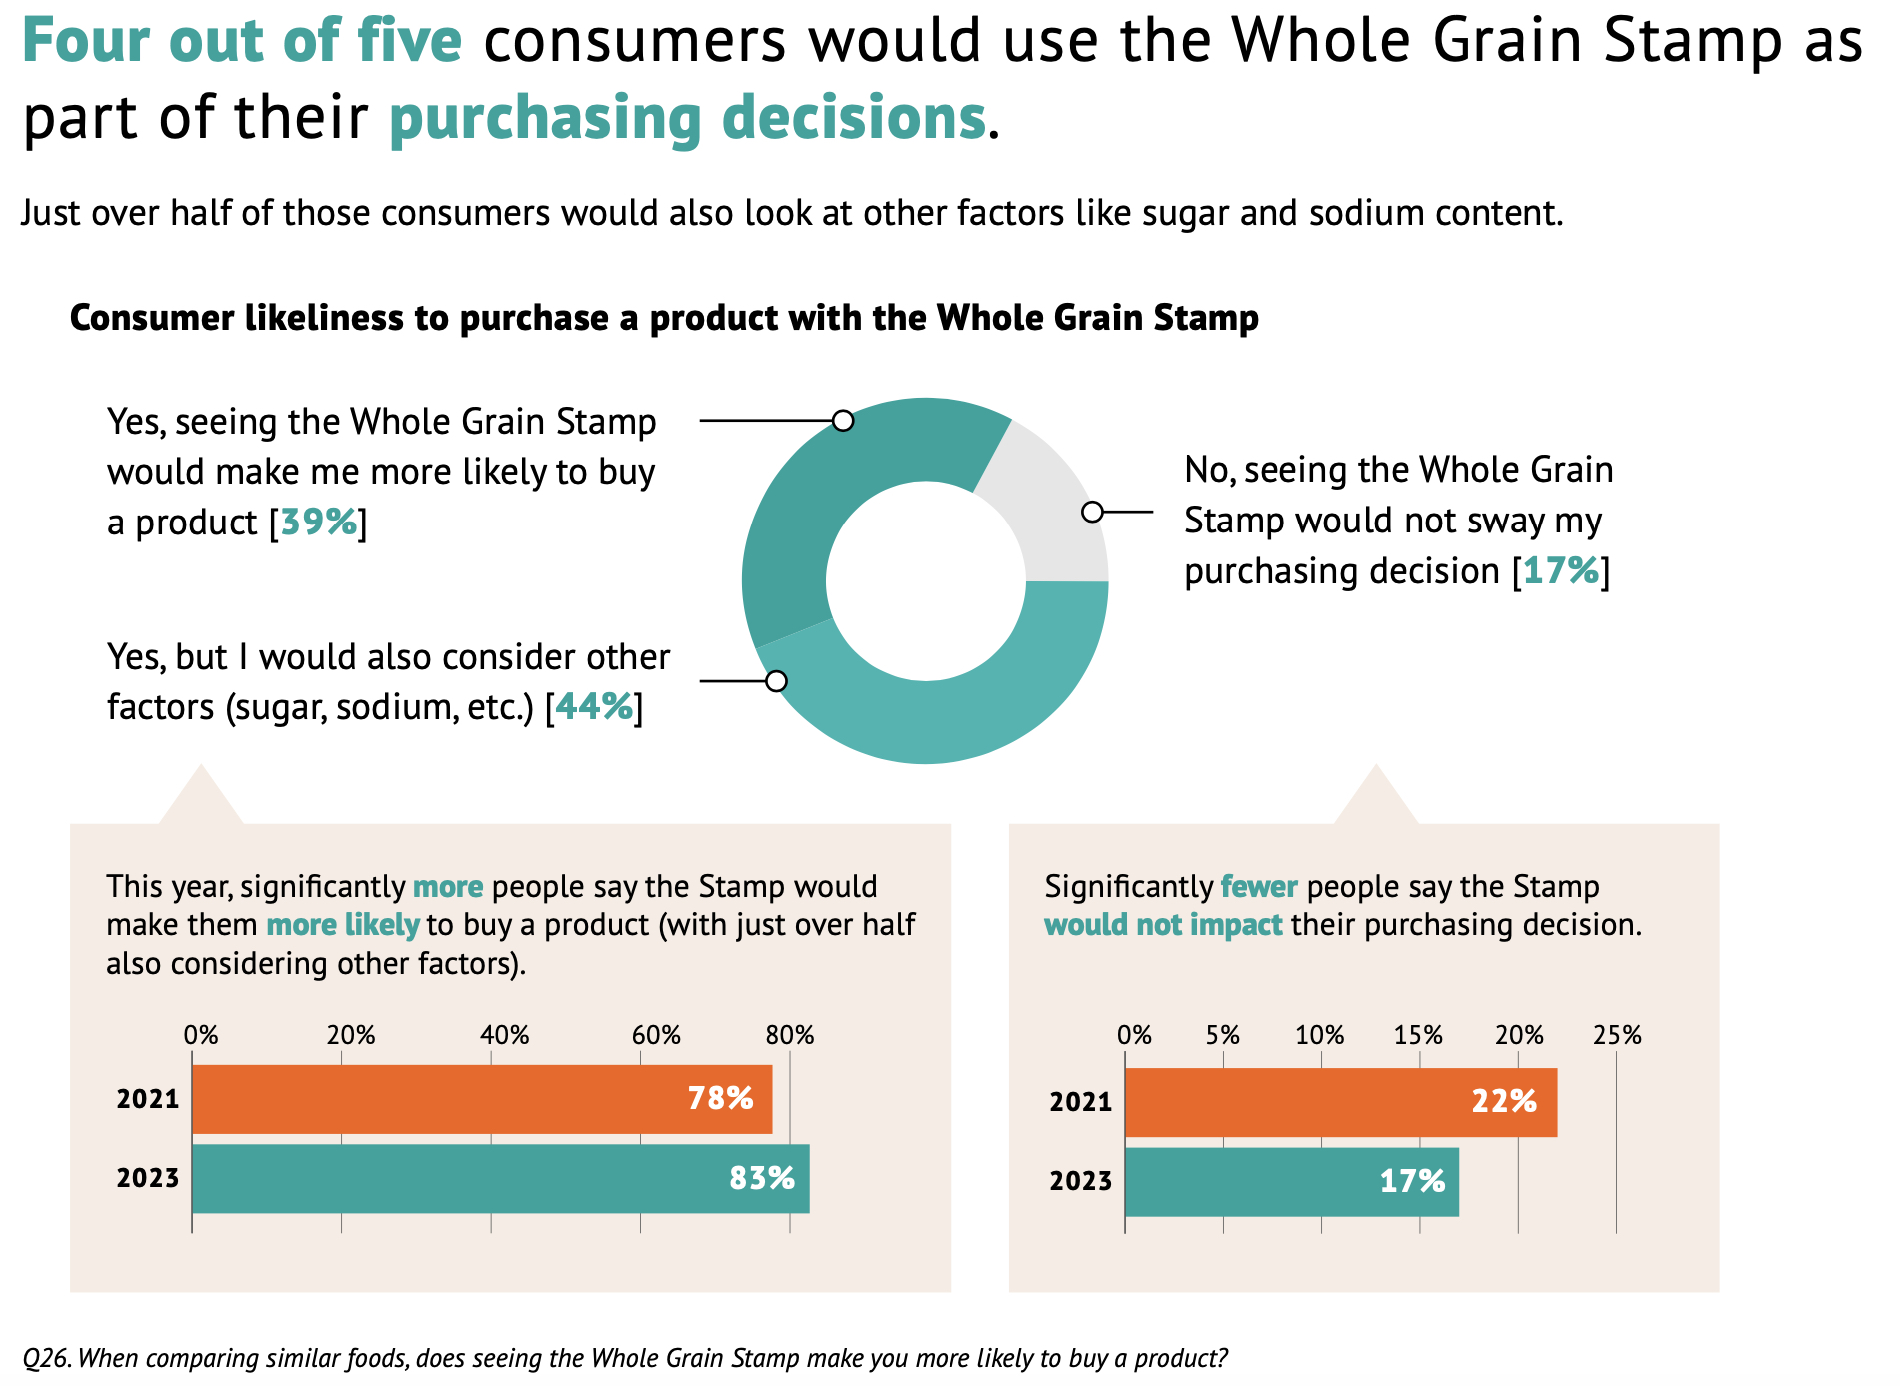 Graph showing that the seeing the Whole Grain Stamp makes consumers more likely to purchase a product